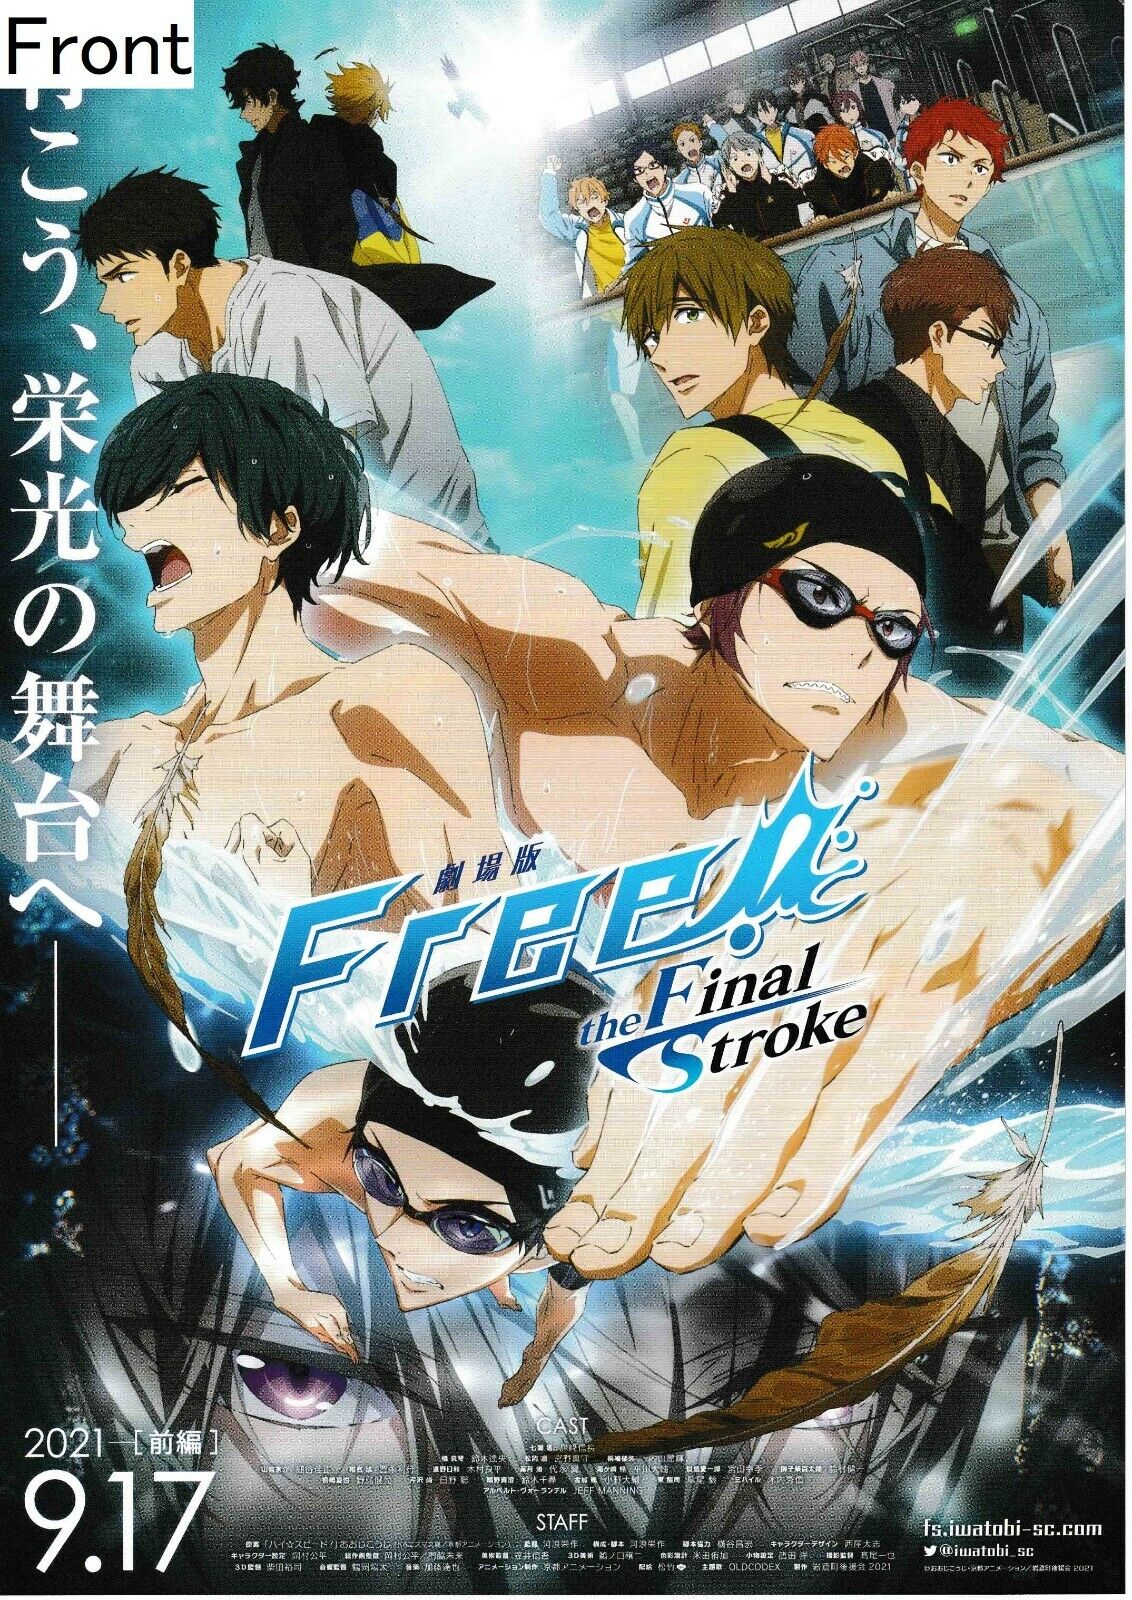 Free The Final Stroke (2021 Jananese Anime)  Promotional Poster TypeA